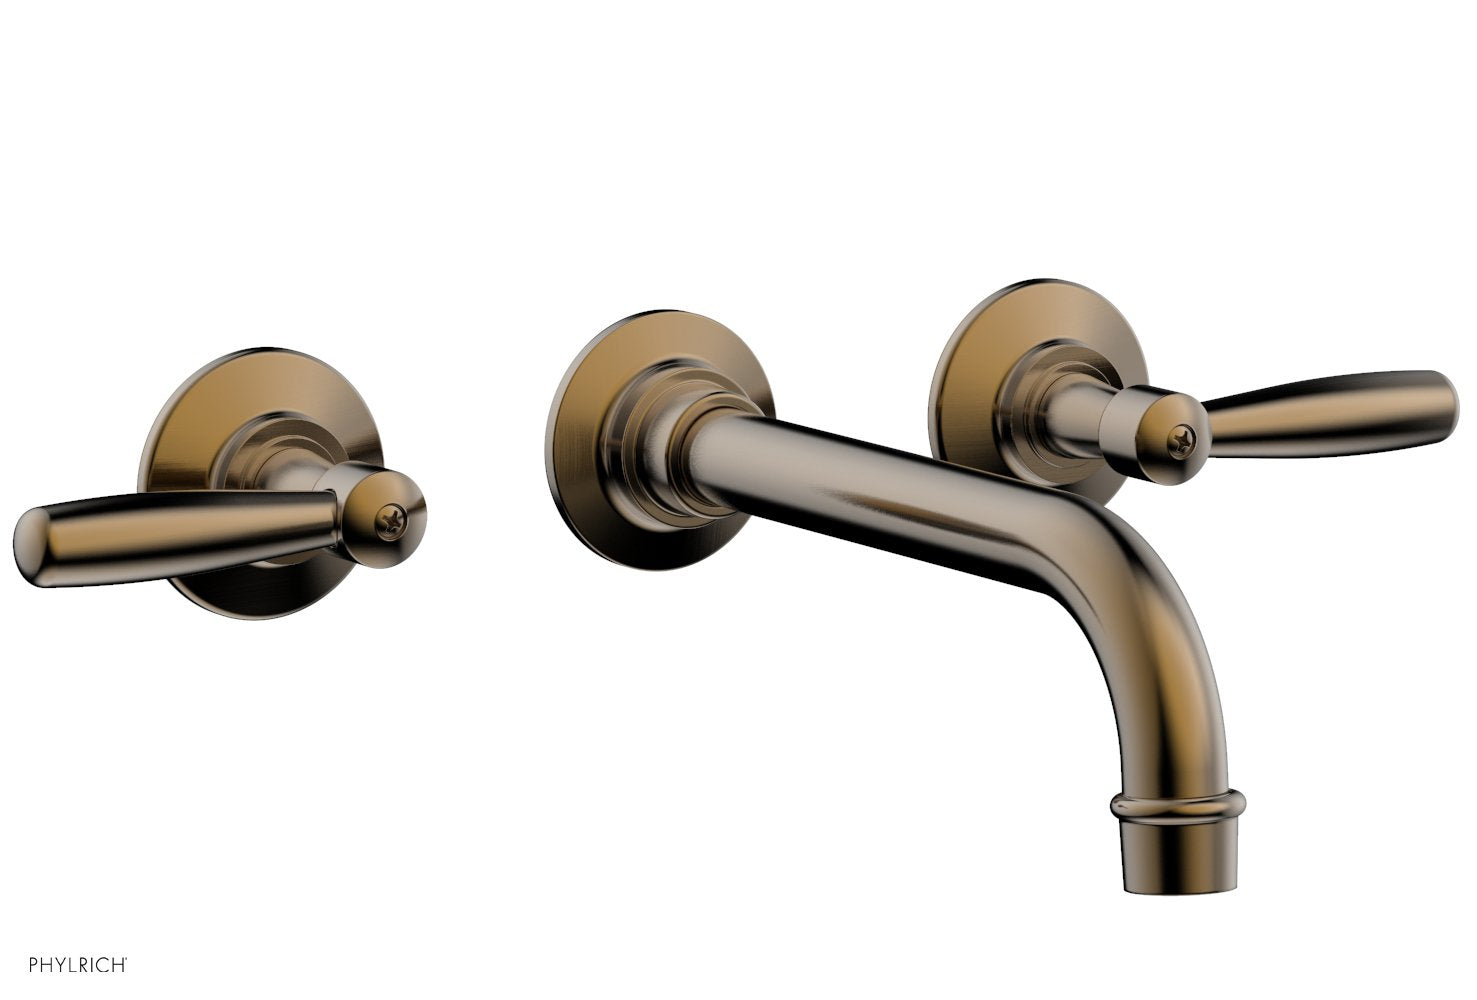 Phylrich WORKS Wall Lavatory Set - Lever Handles